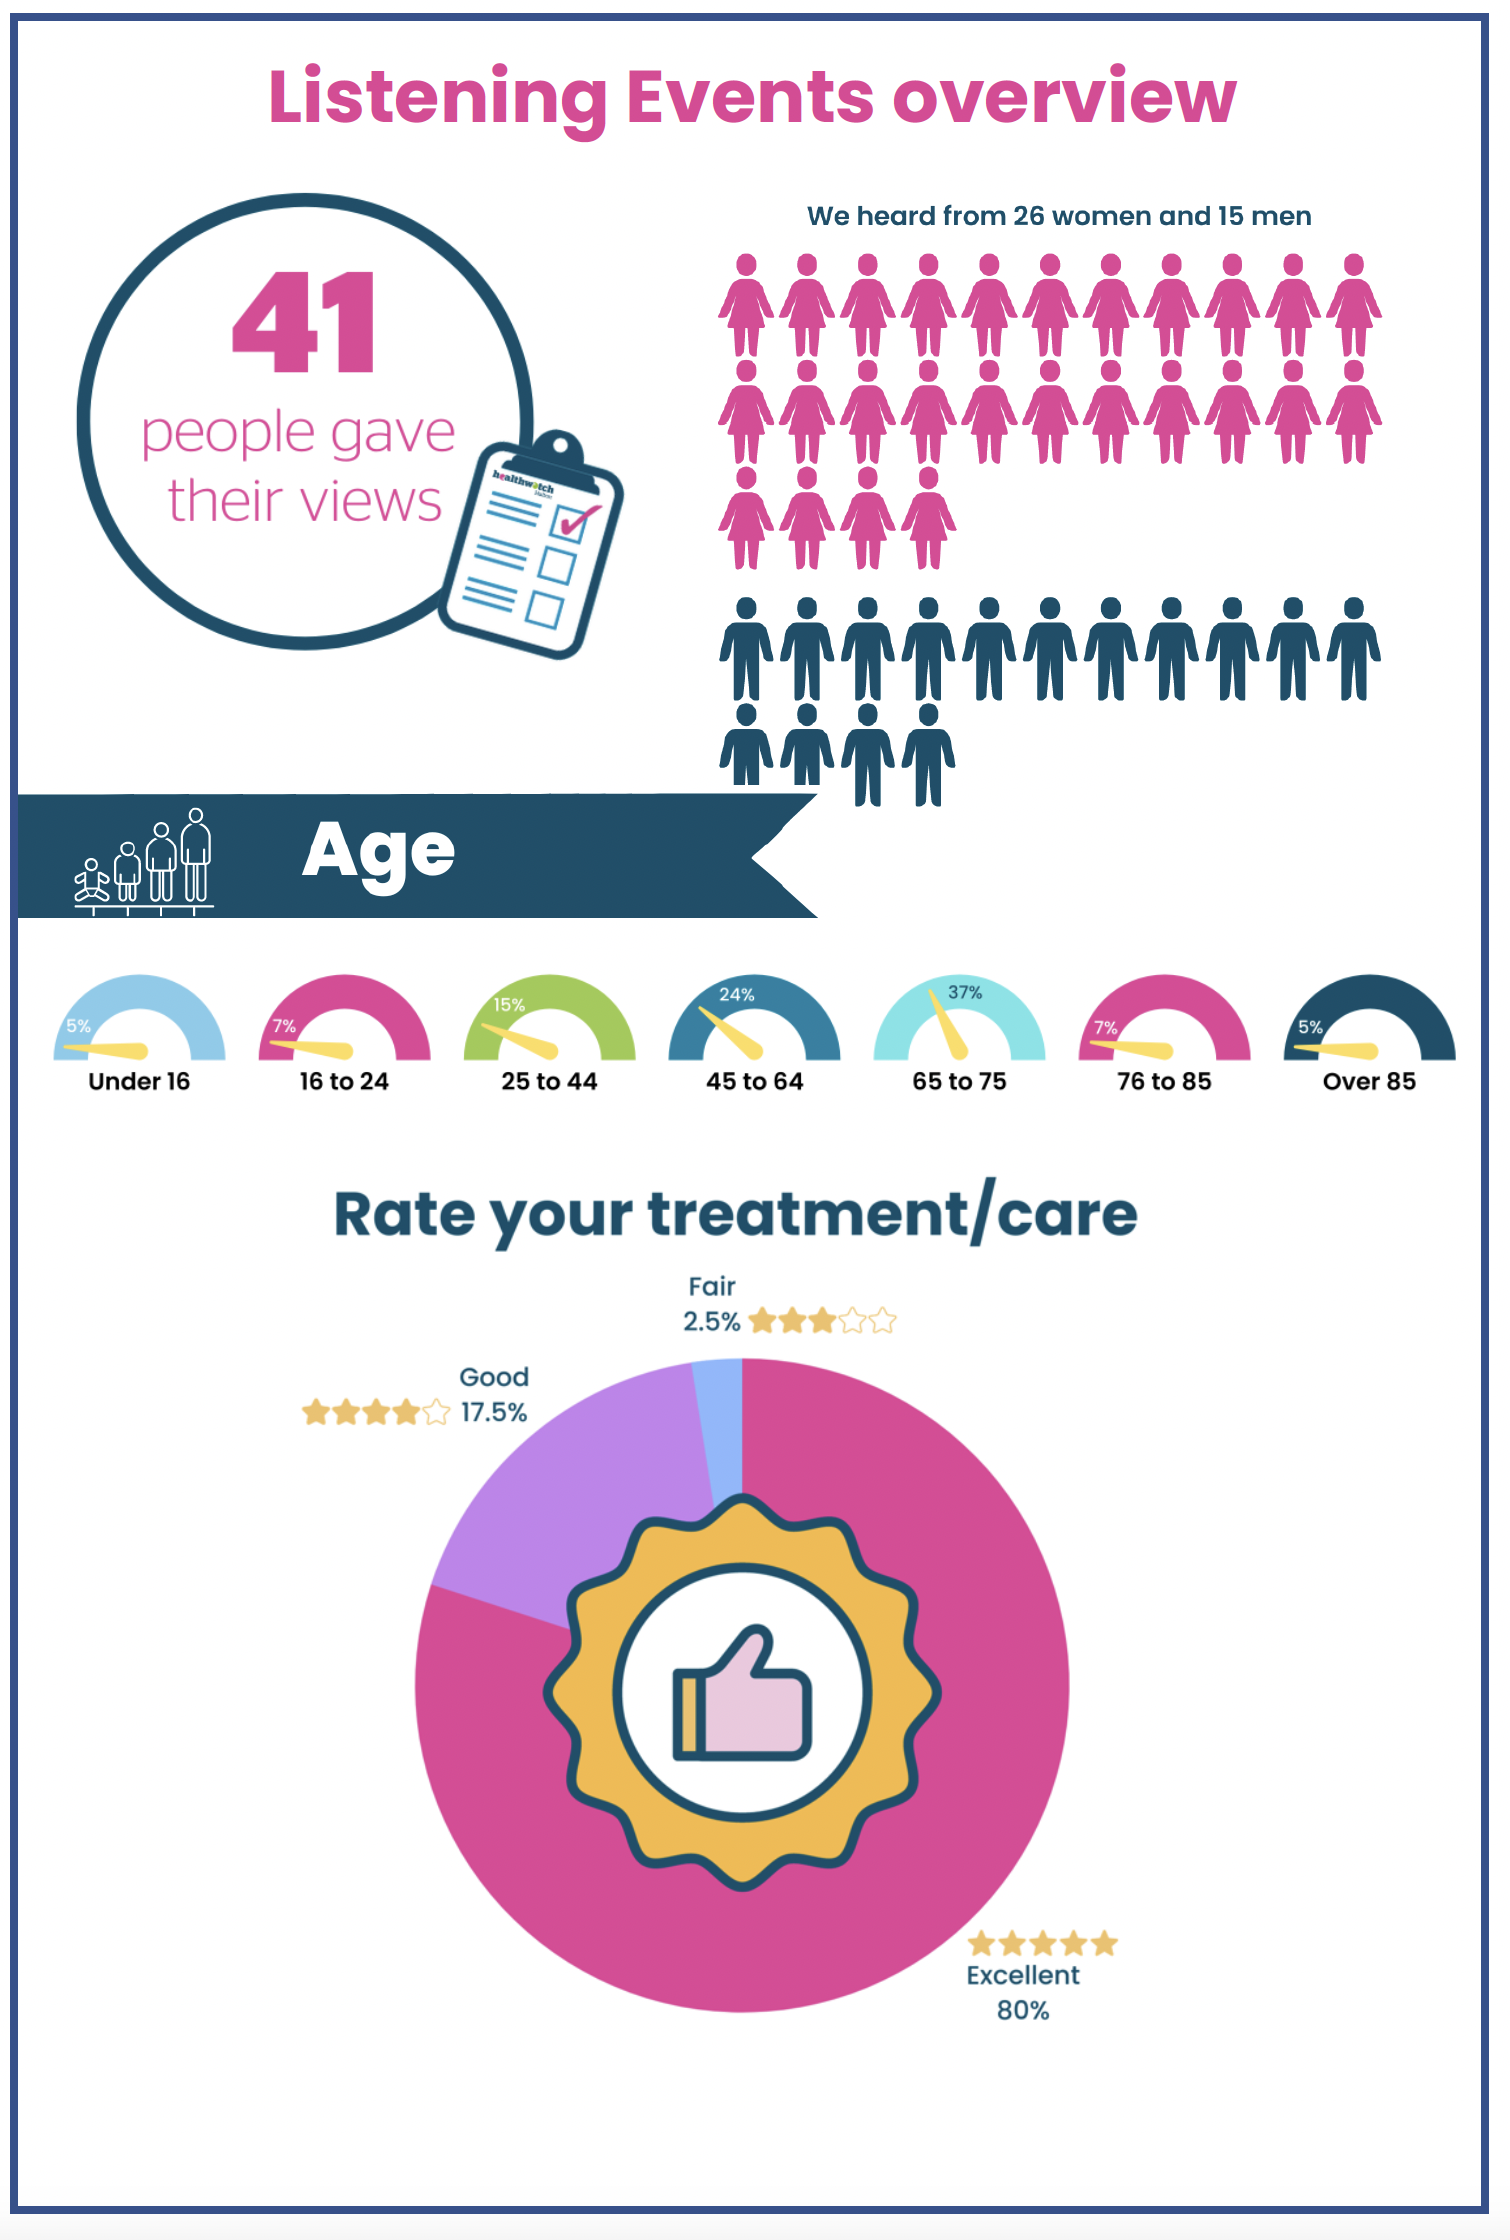 Infographic. 41 people gave their views. 26 women and 15 men. Ages, 5% were under 16, 7% were 16 to 24 years old. 15% were 25 to 44 years old. 24% were 45 to 64 years old. 37% were 65 to 75 years old. 7% were 76 to 85 years old. 5% were over 85 years of age. Rate your treatment or care. Excellent, 80%. Good 17.5%, Fair 2.5%